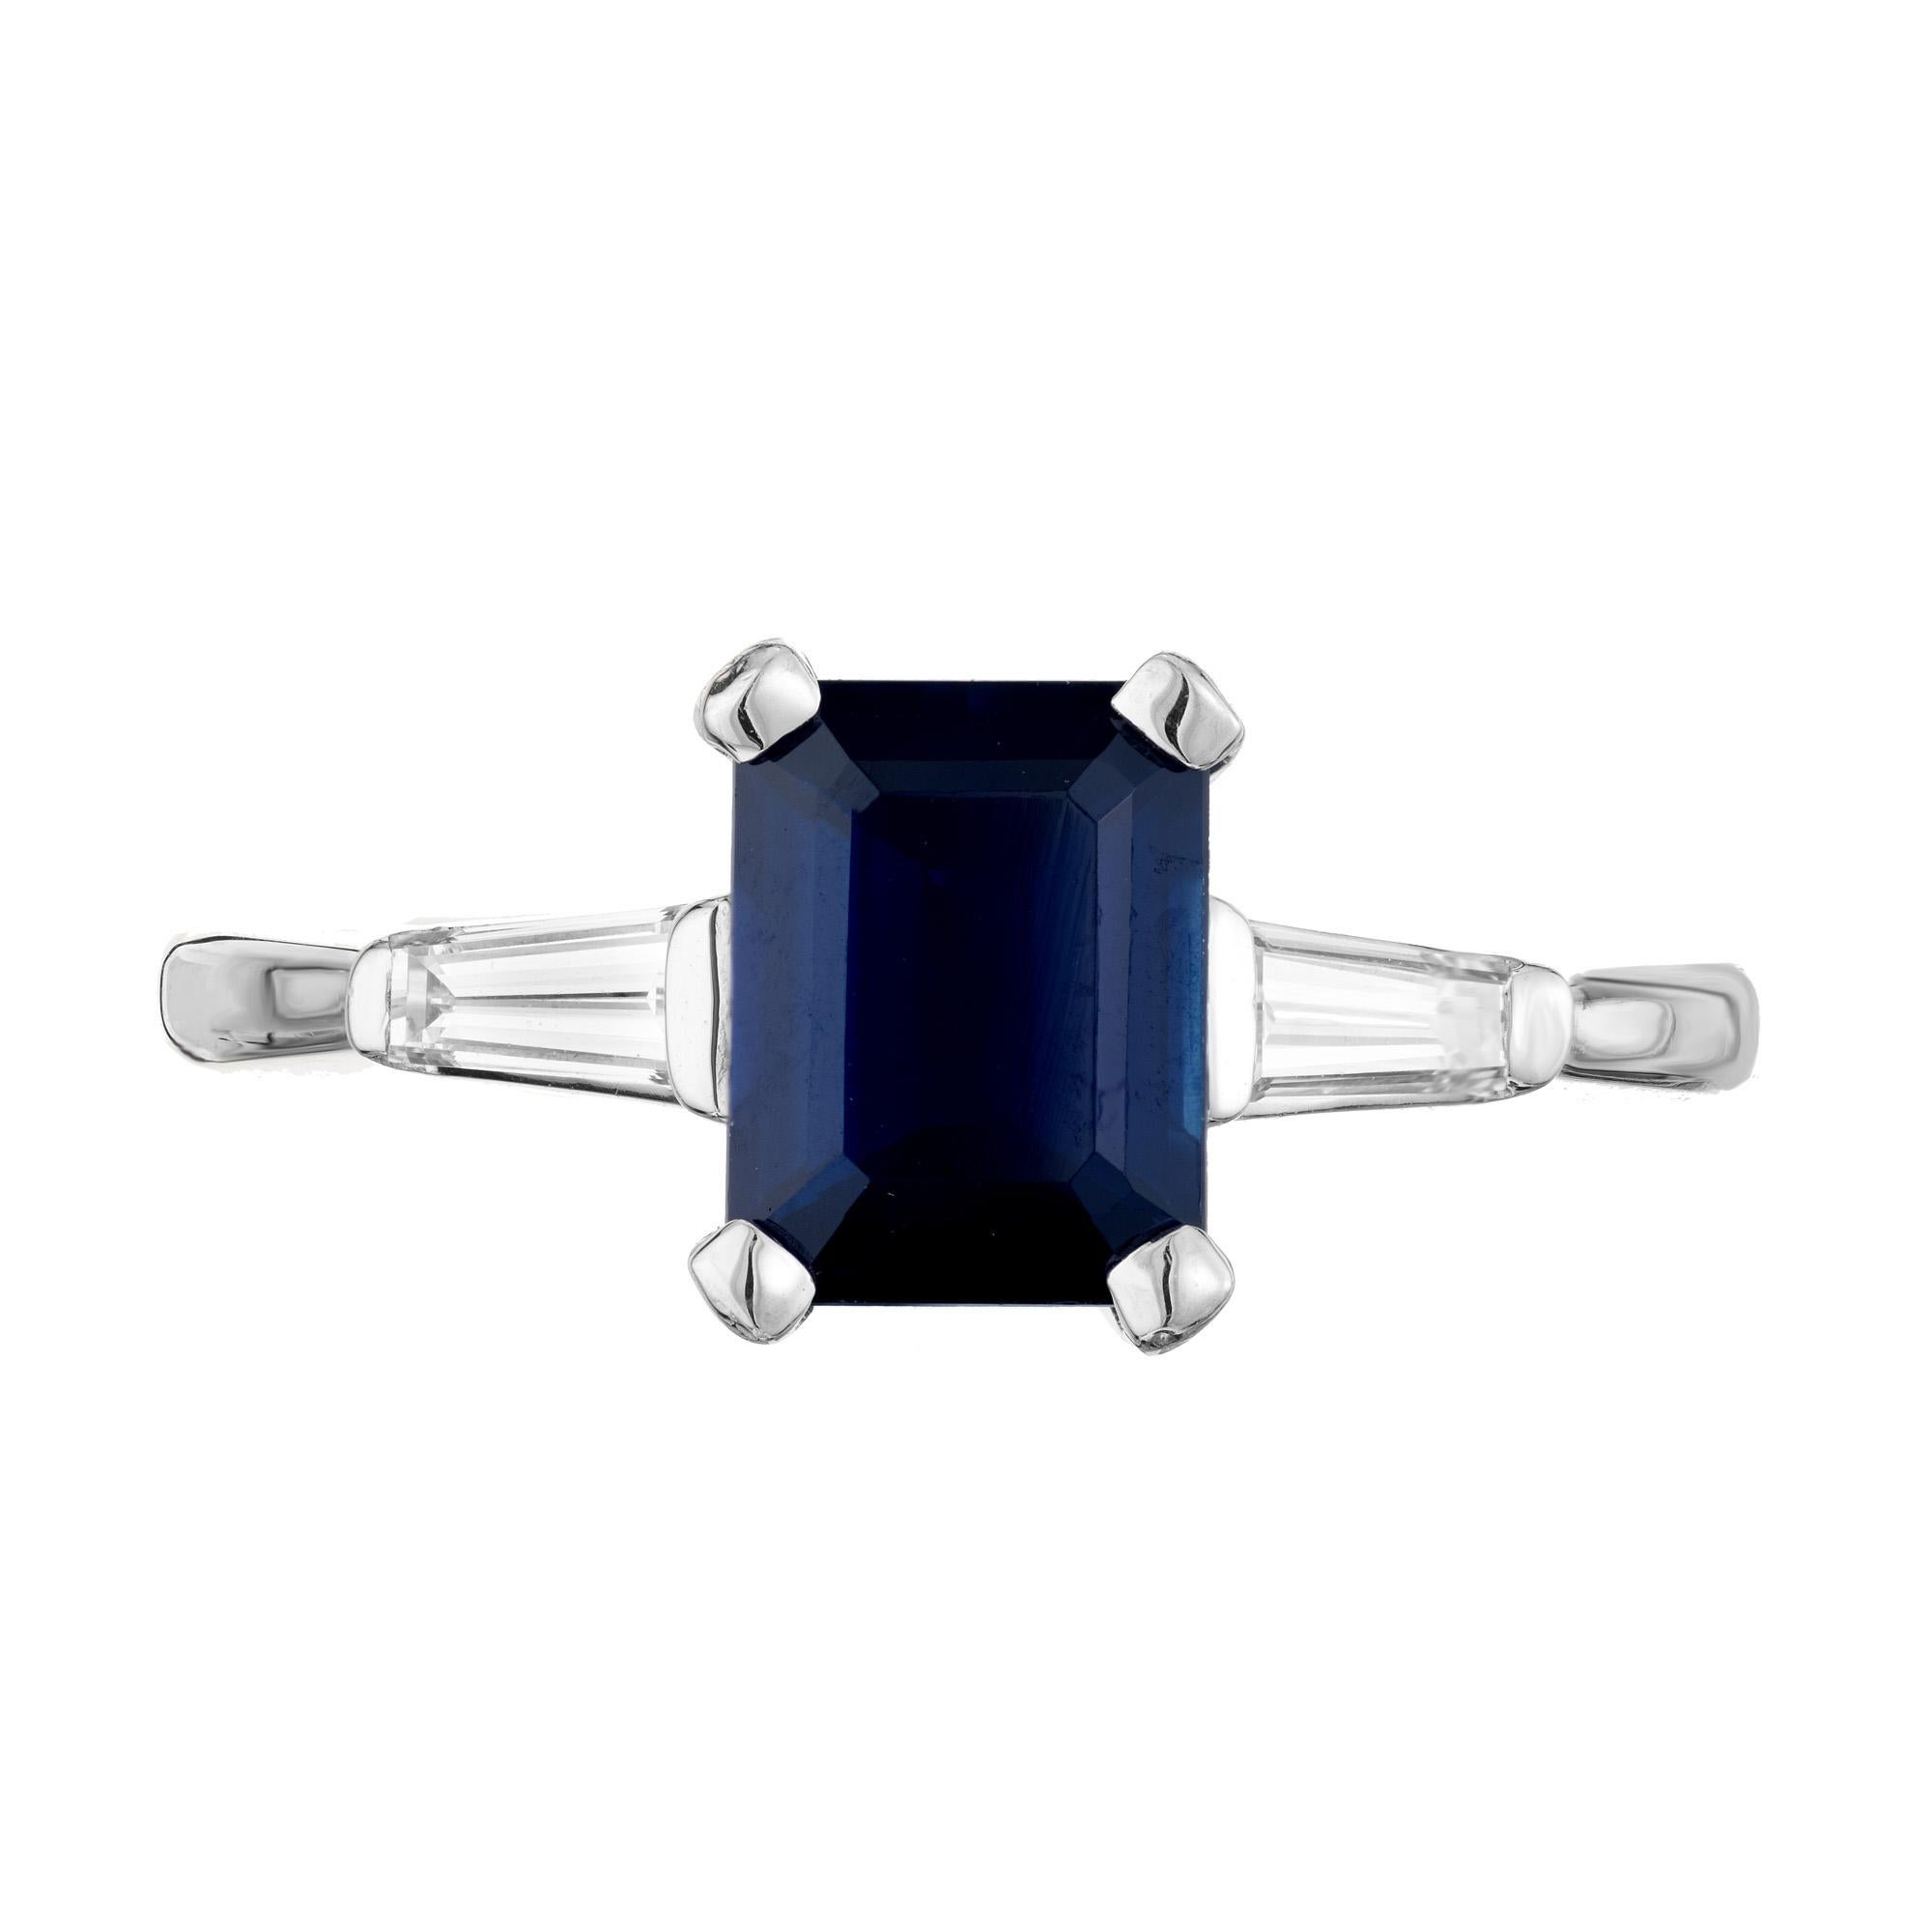 Sapphire and diamond engagement ring. GIA certified octagonal 1.80ct blue sapphire center stone, mounted in a platinum three-stone setting. Accented with two tapered baguette side diamonds. The sapphire is GIA certified as simple heat only. Simple